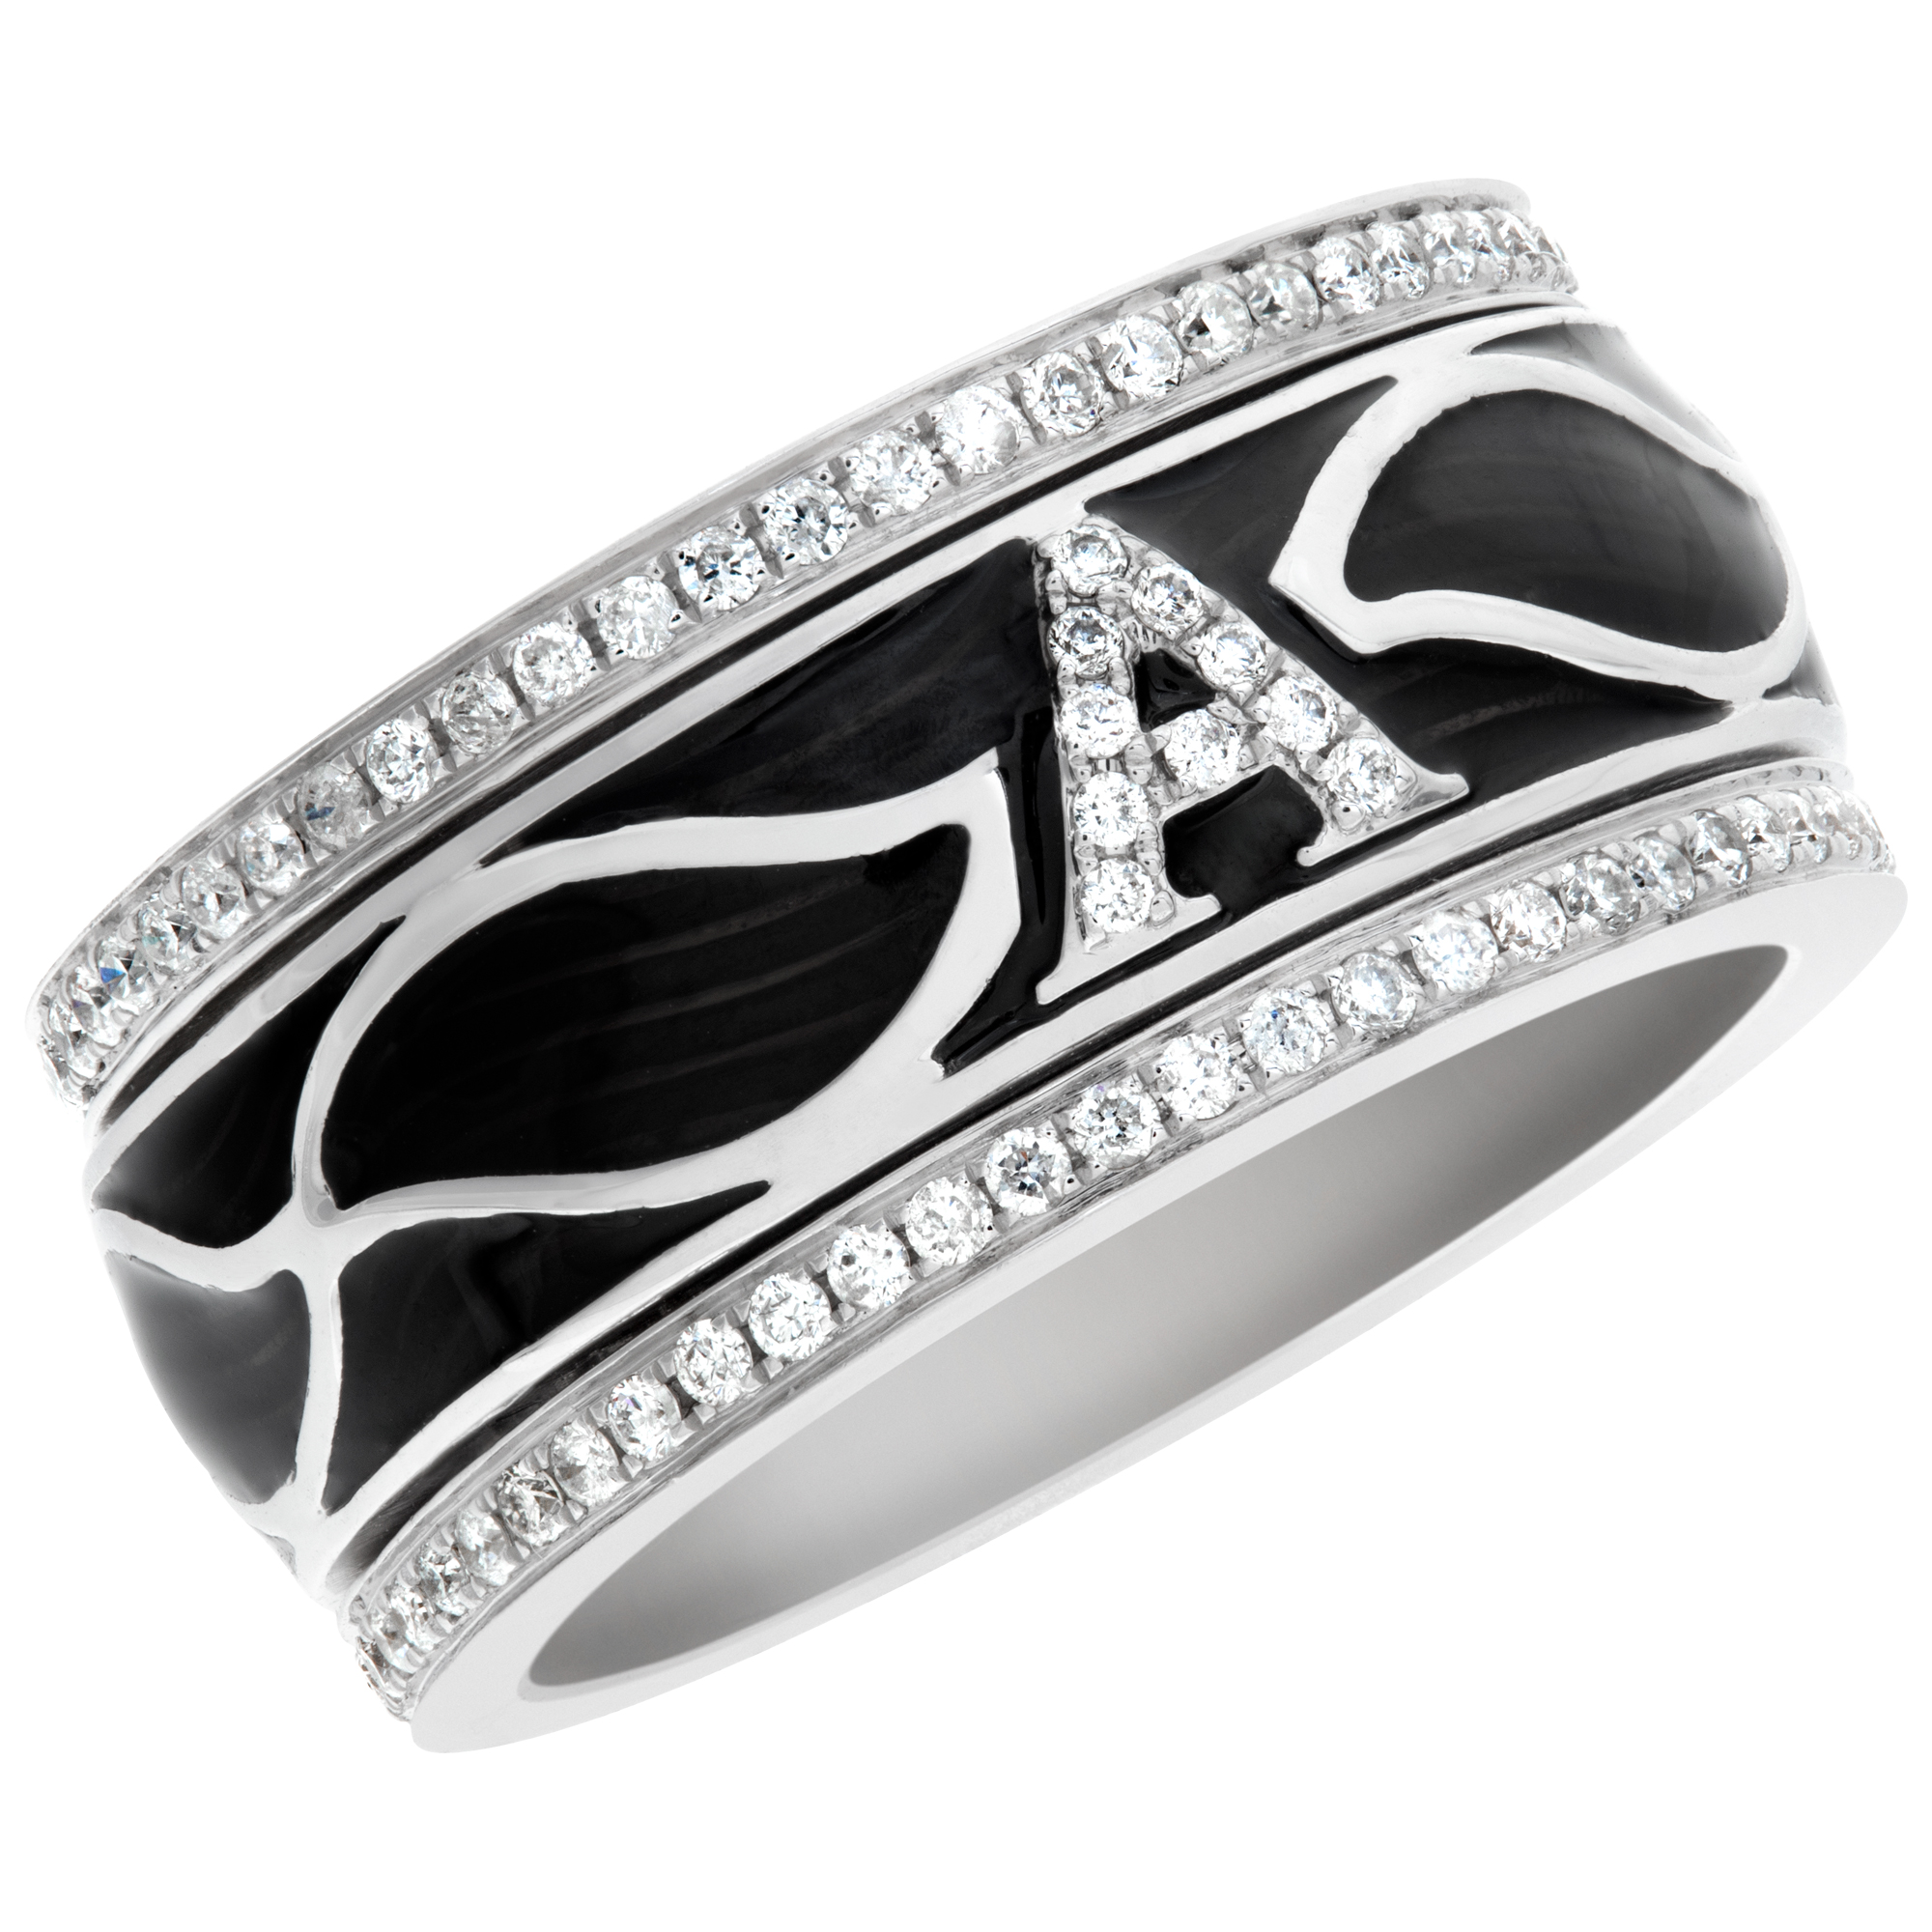 Black enamel and diamond ring with initial "A" set in diamonds - 18k white gold image 2